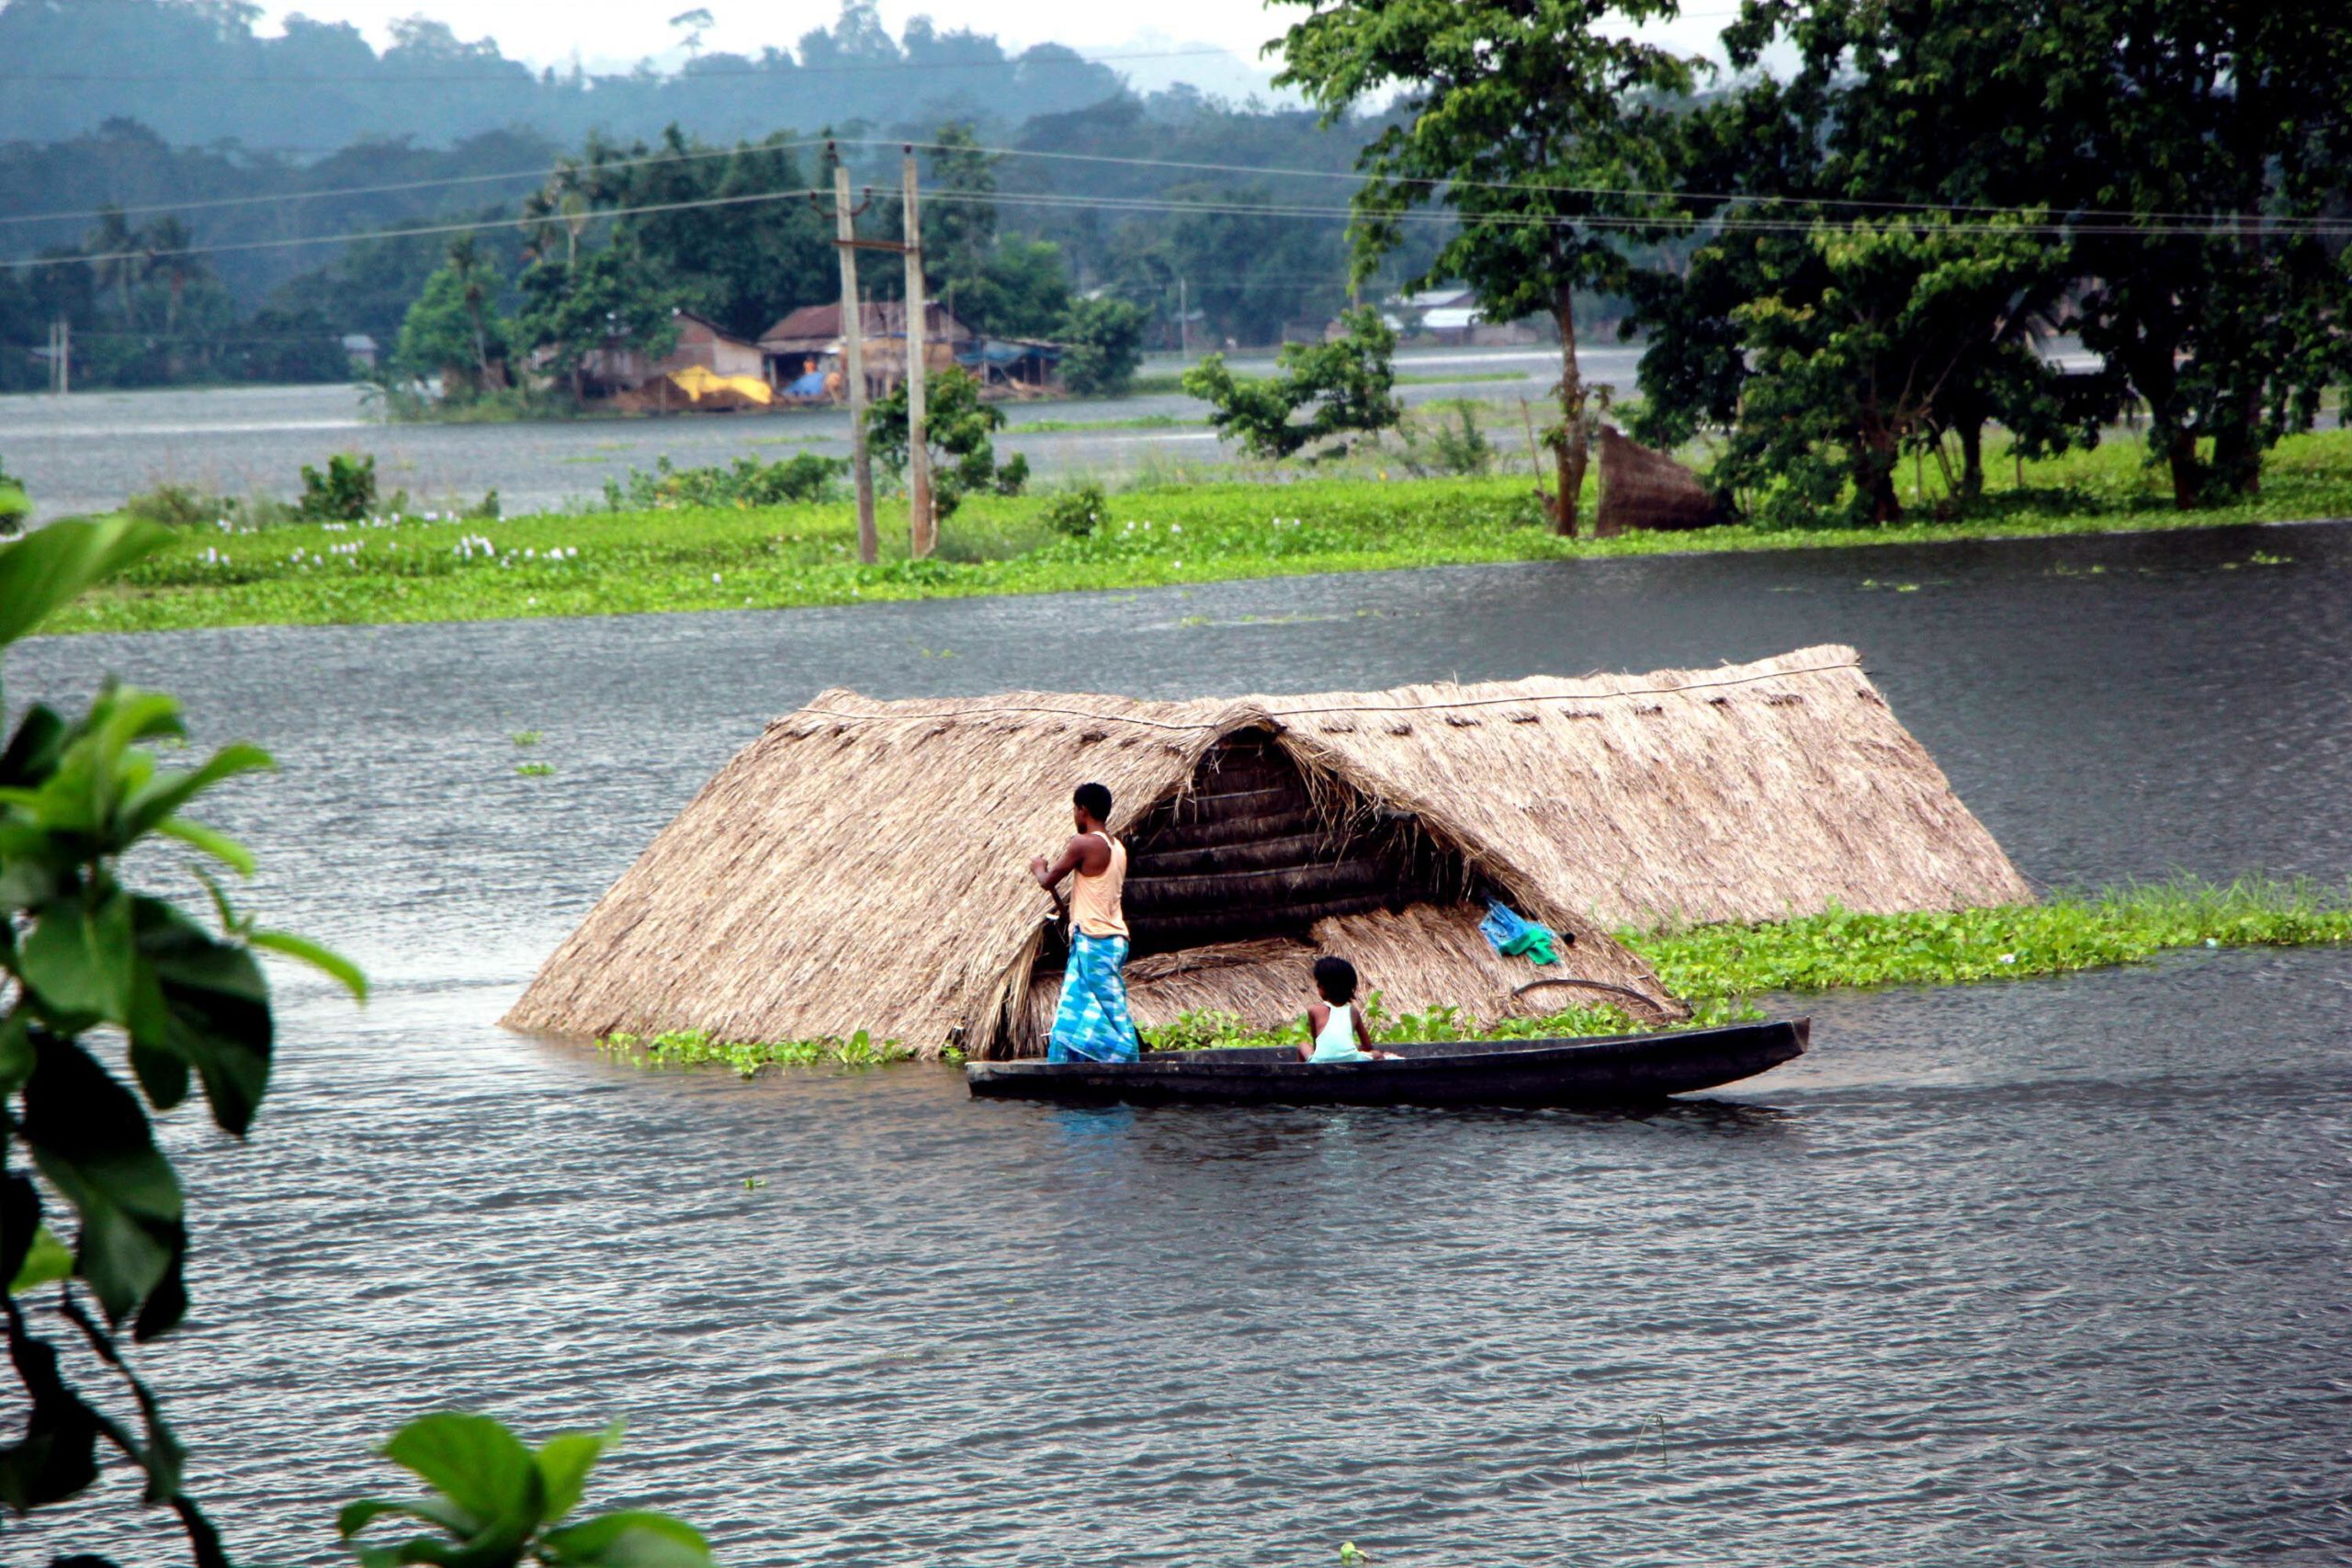 Flood victim moves towards safe land as their house submerged in flood water (Photo by Simanta Talukdar/Pacific Press) Credit: Pacific Press Agency/Alamy Live News